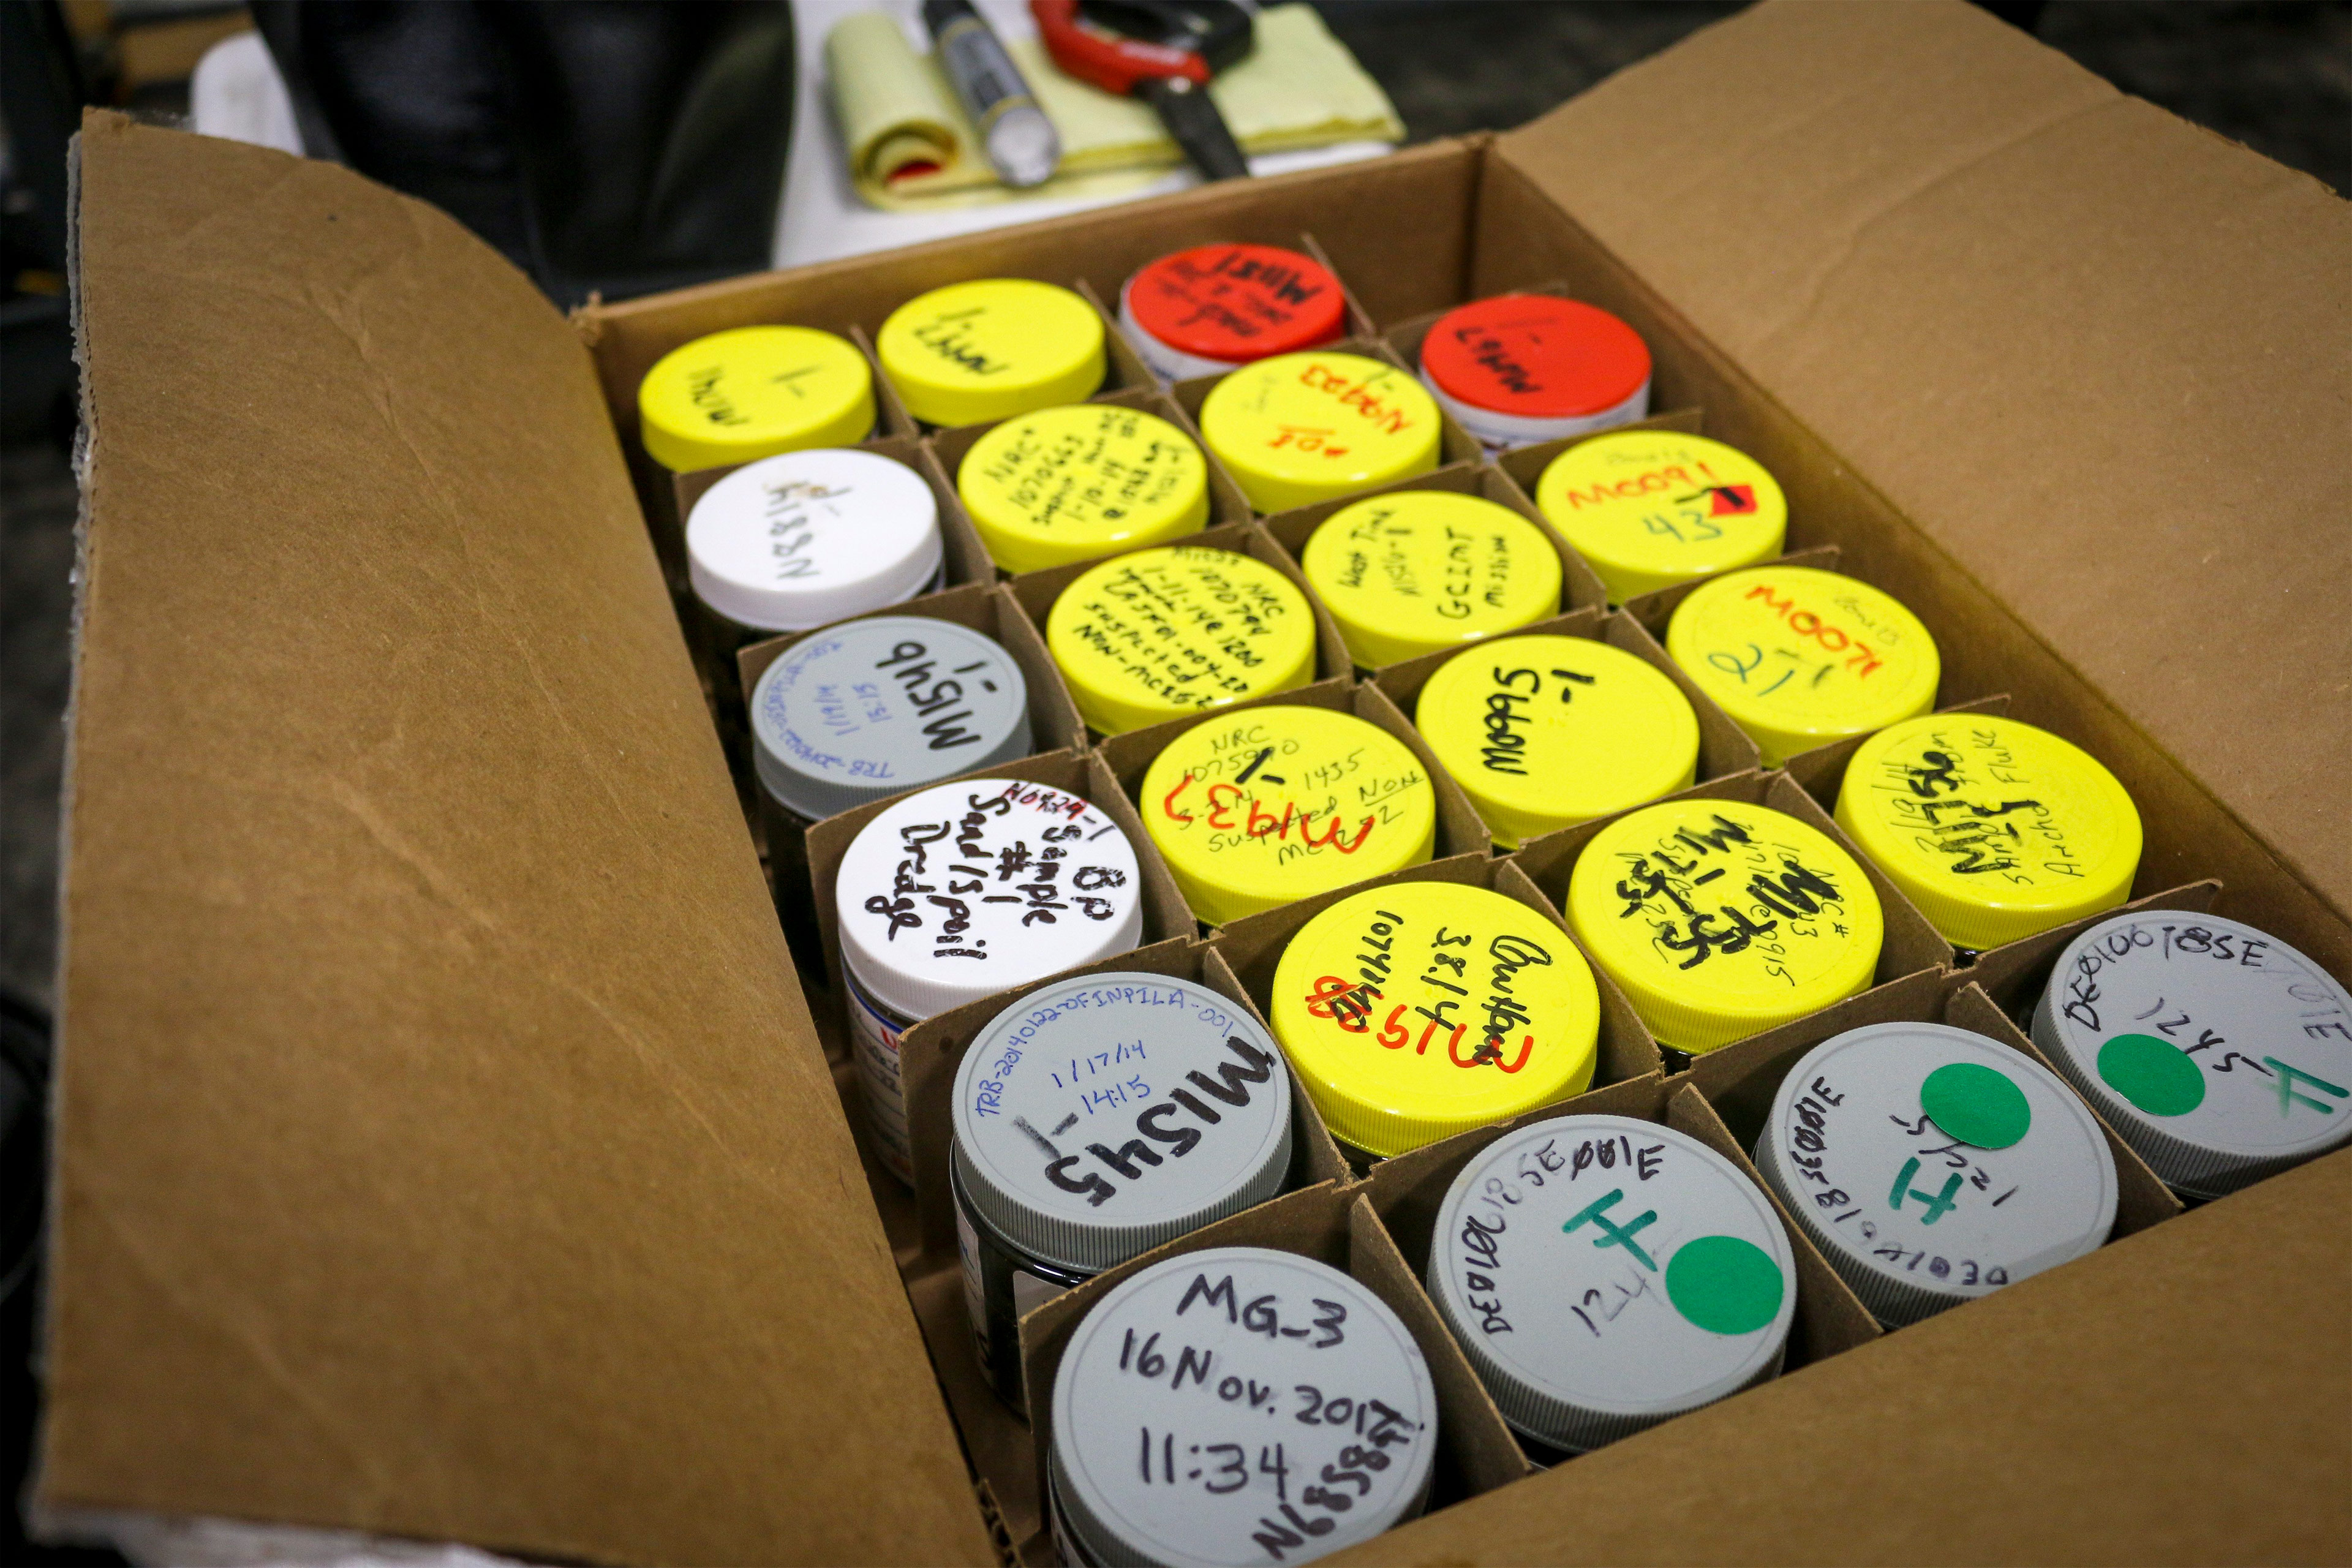 A photo shows a cardboard box filled with jars with handwritten labels on top of them.